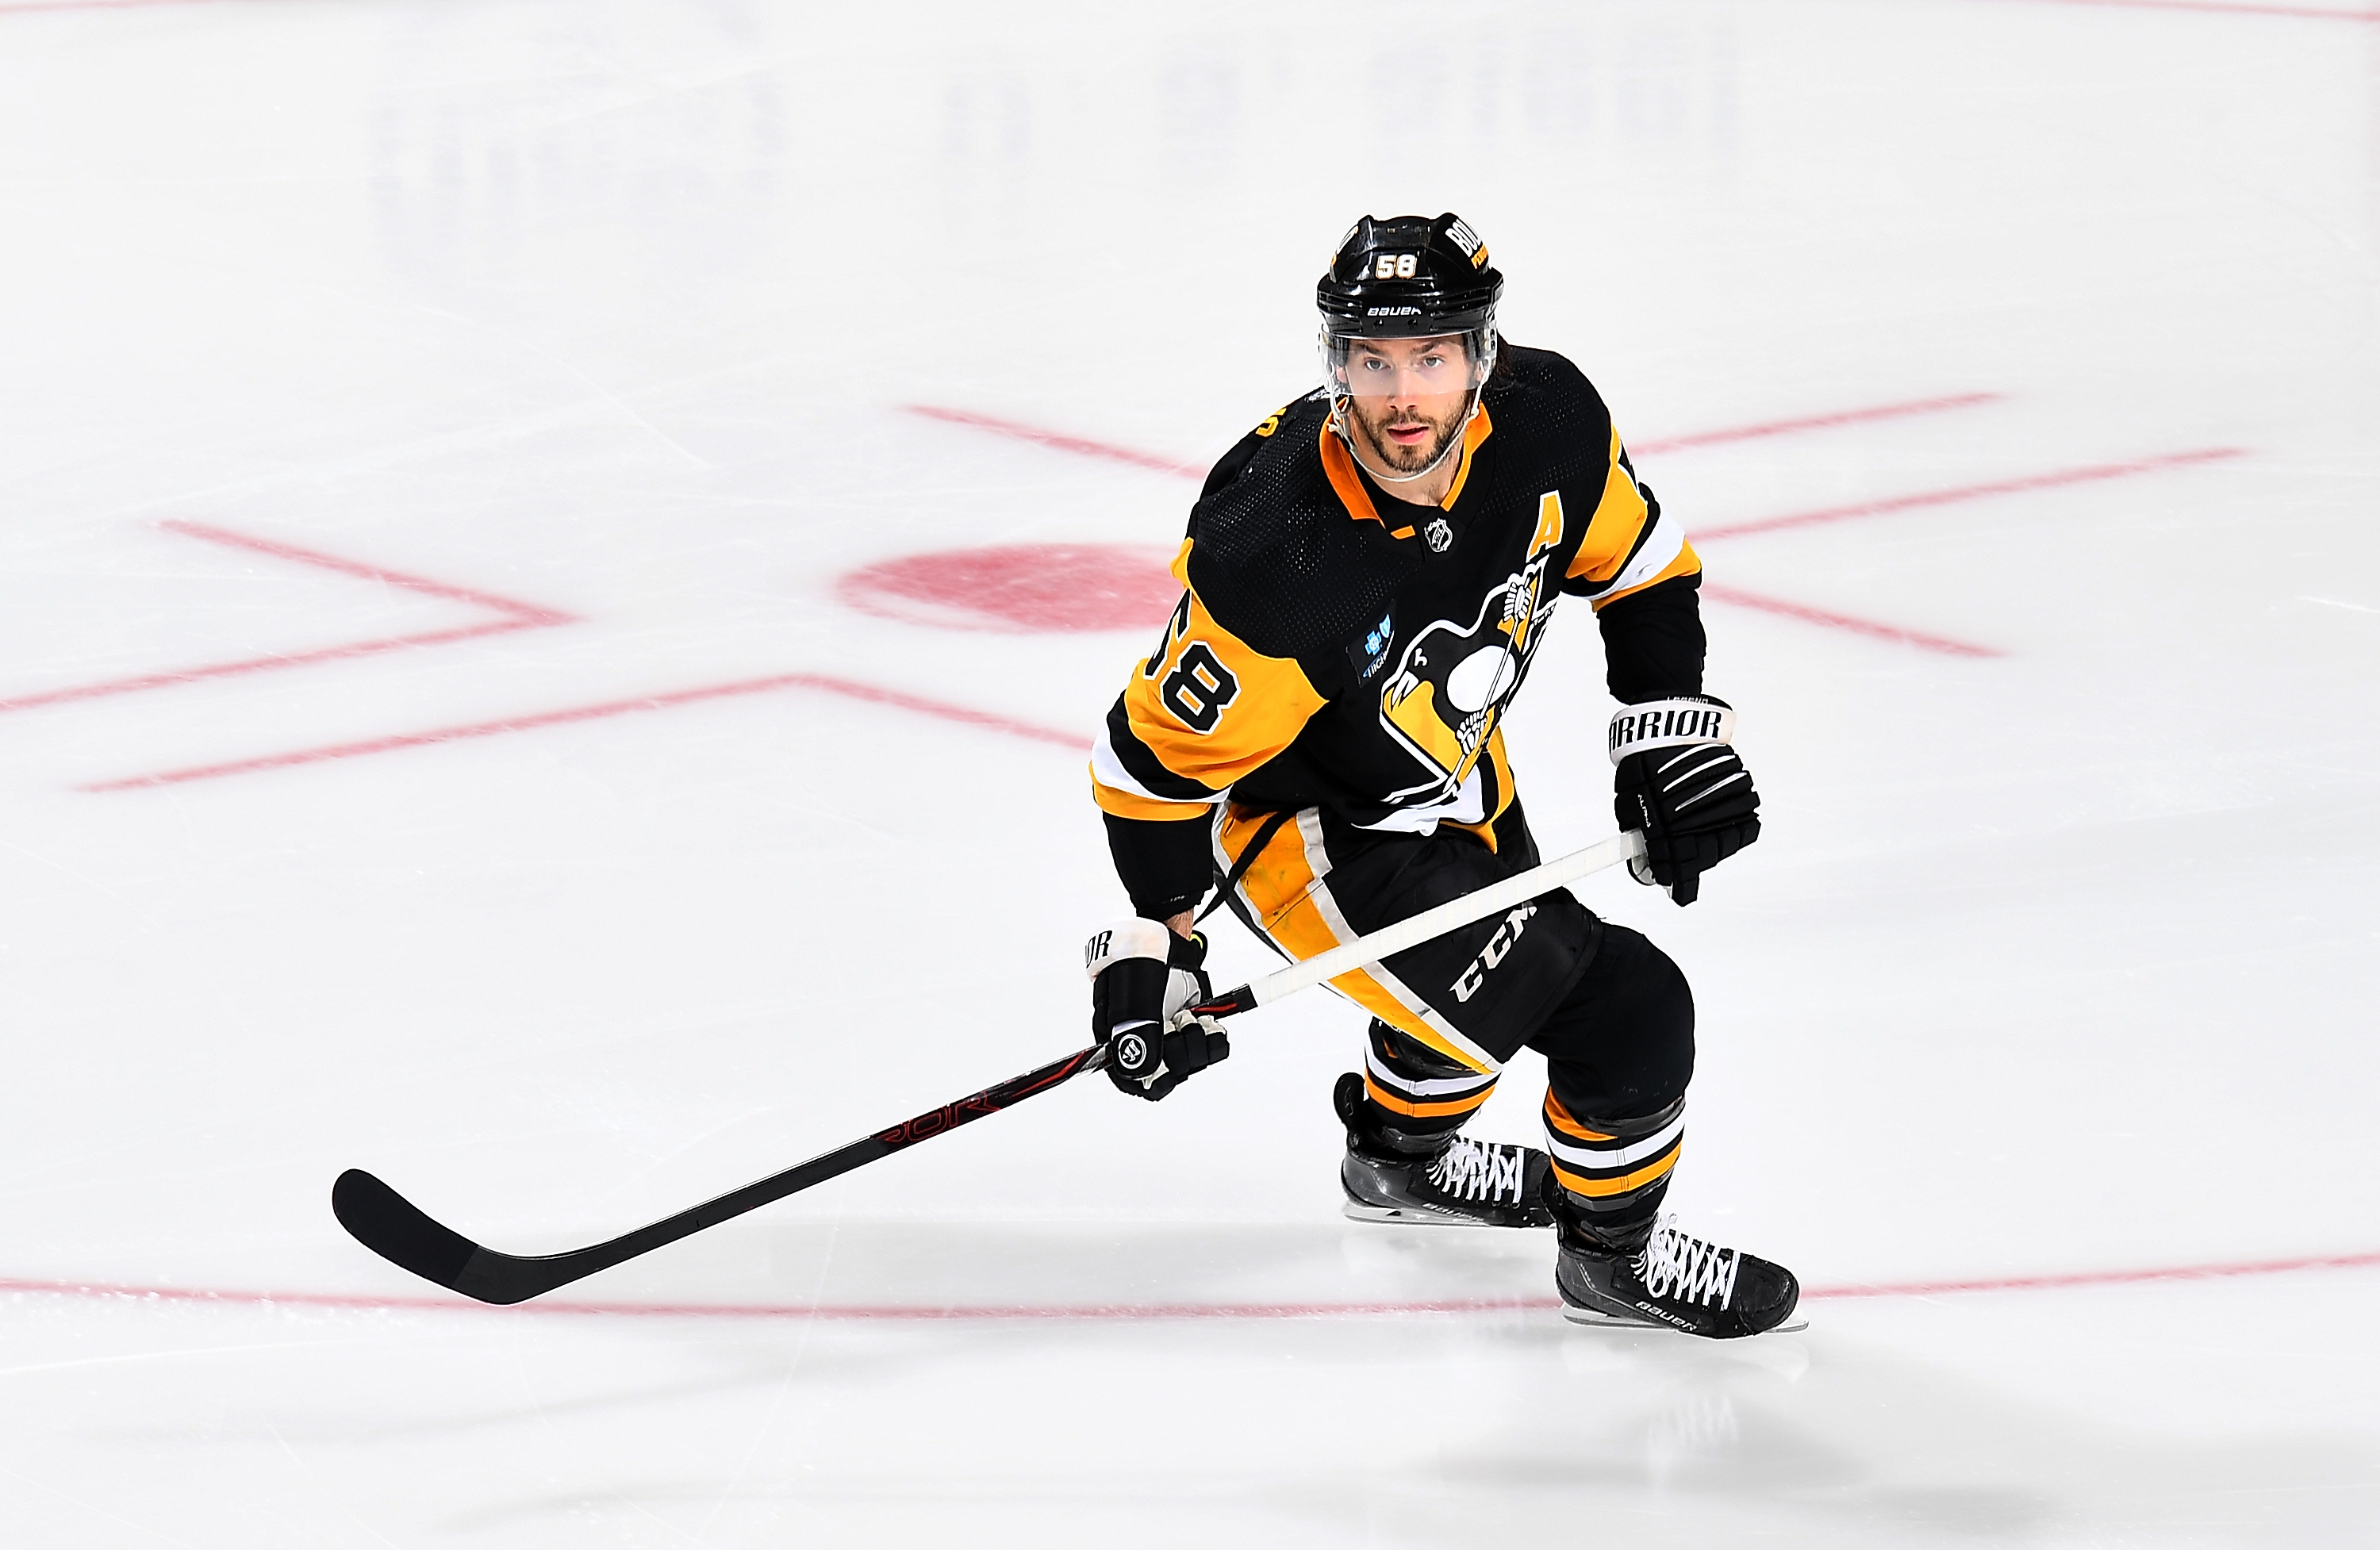 Why Kris Letang, nominated for Masterton for 4th time, is always 'going to  push through' adversity